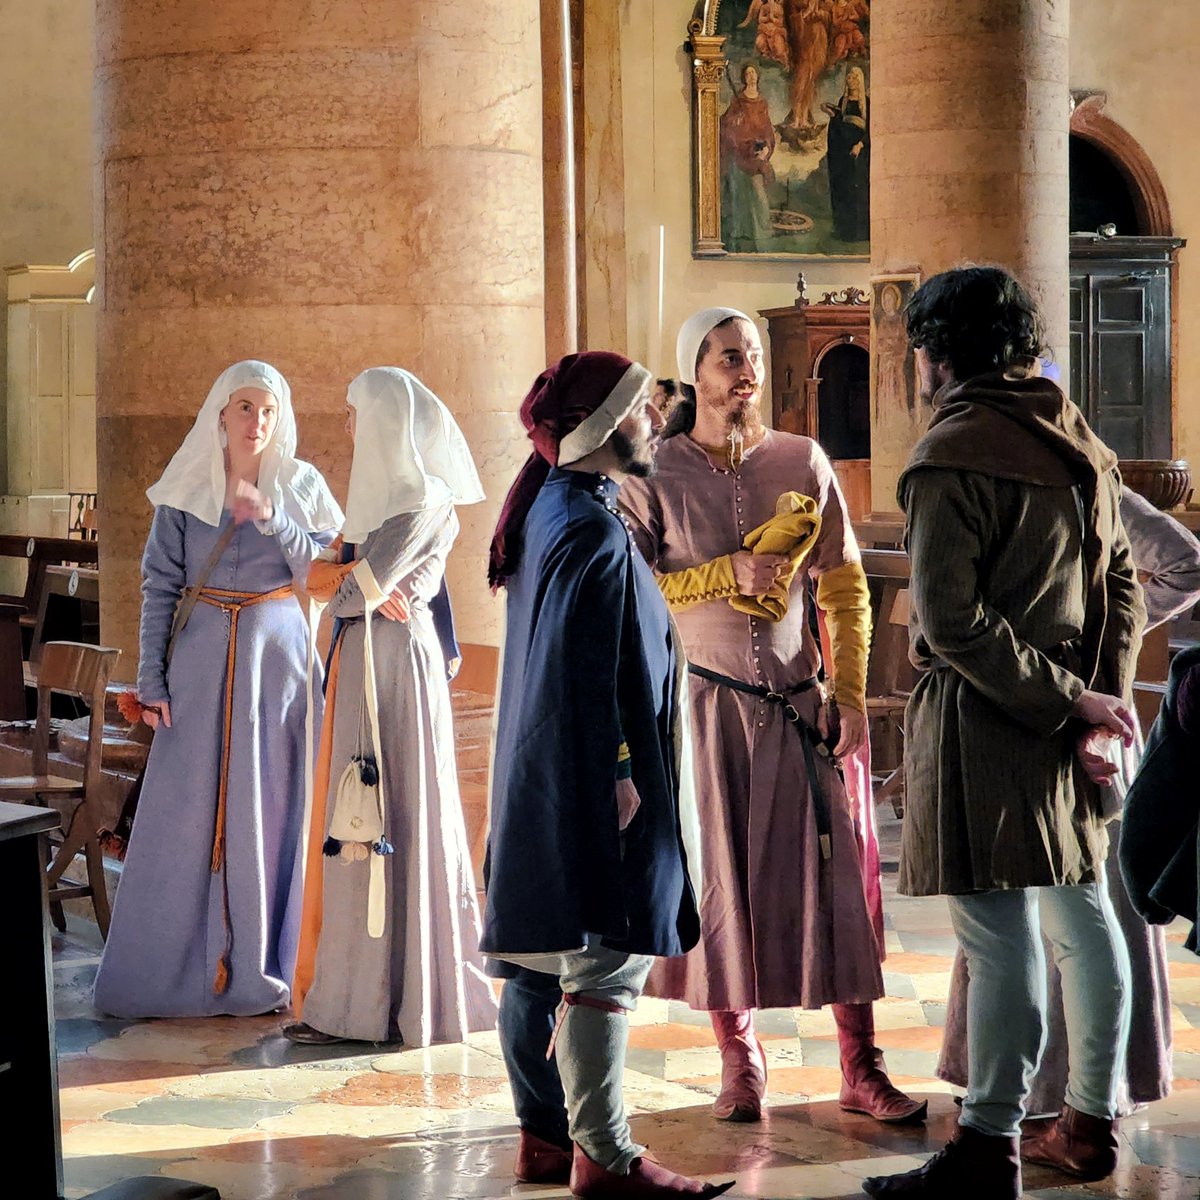 Sometimes the light is perfect and the people stand just right, and you get a perfect late medieval painting in real life.
#14thCentury #Reenactment #anticopaliodiverona